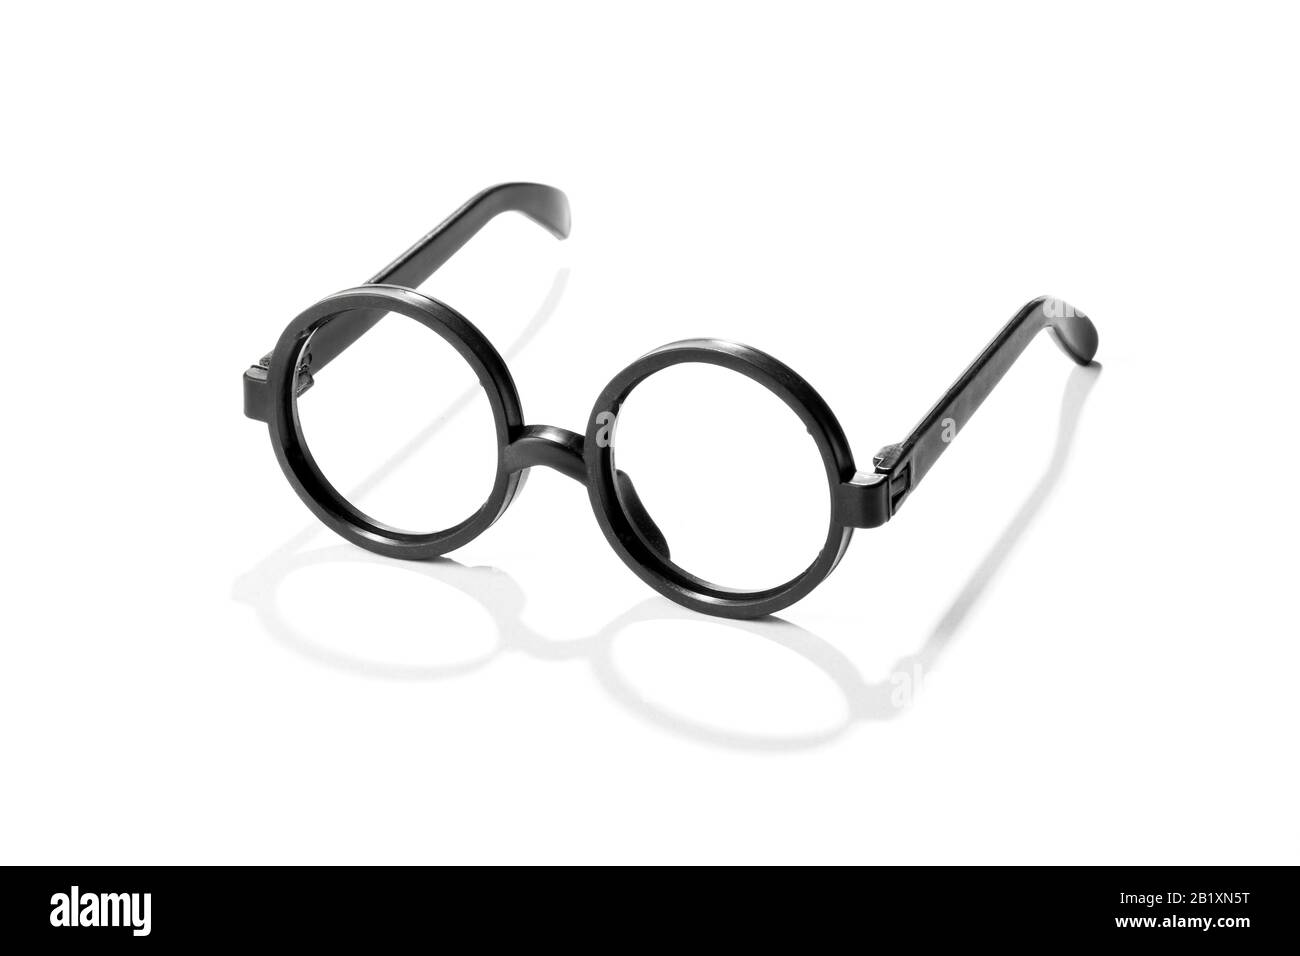 Pair of round vintage plastic reading glasses with black frames casting a shadow on a white background Stock Photo